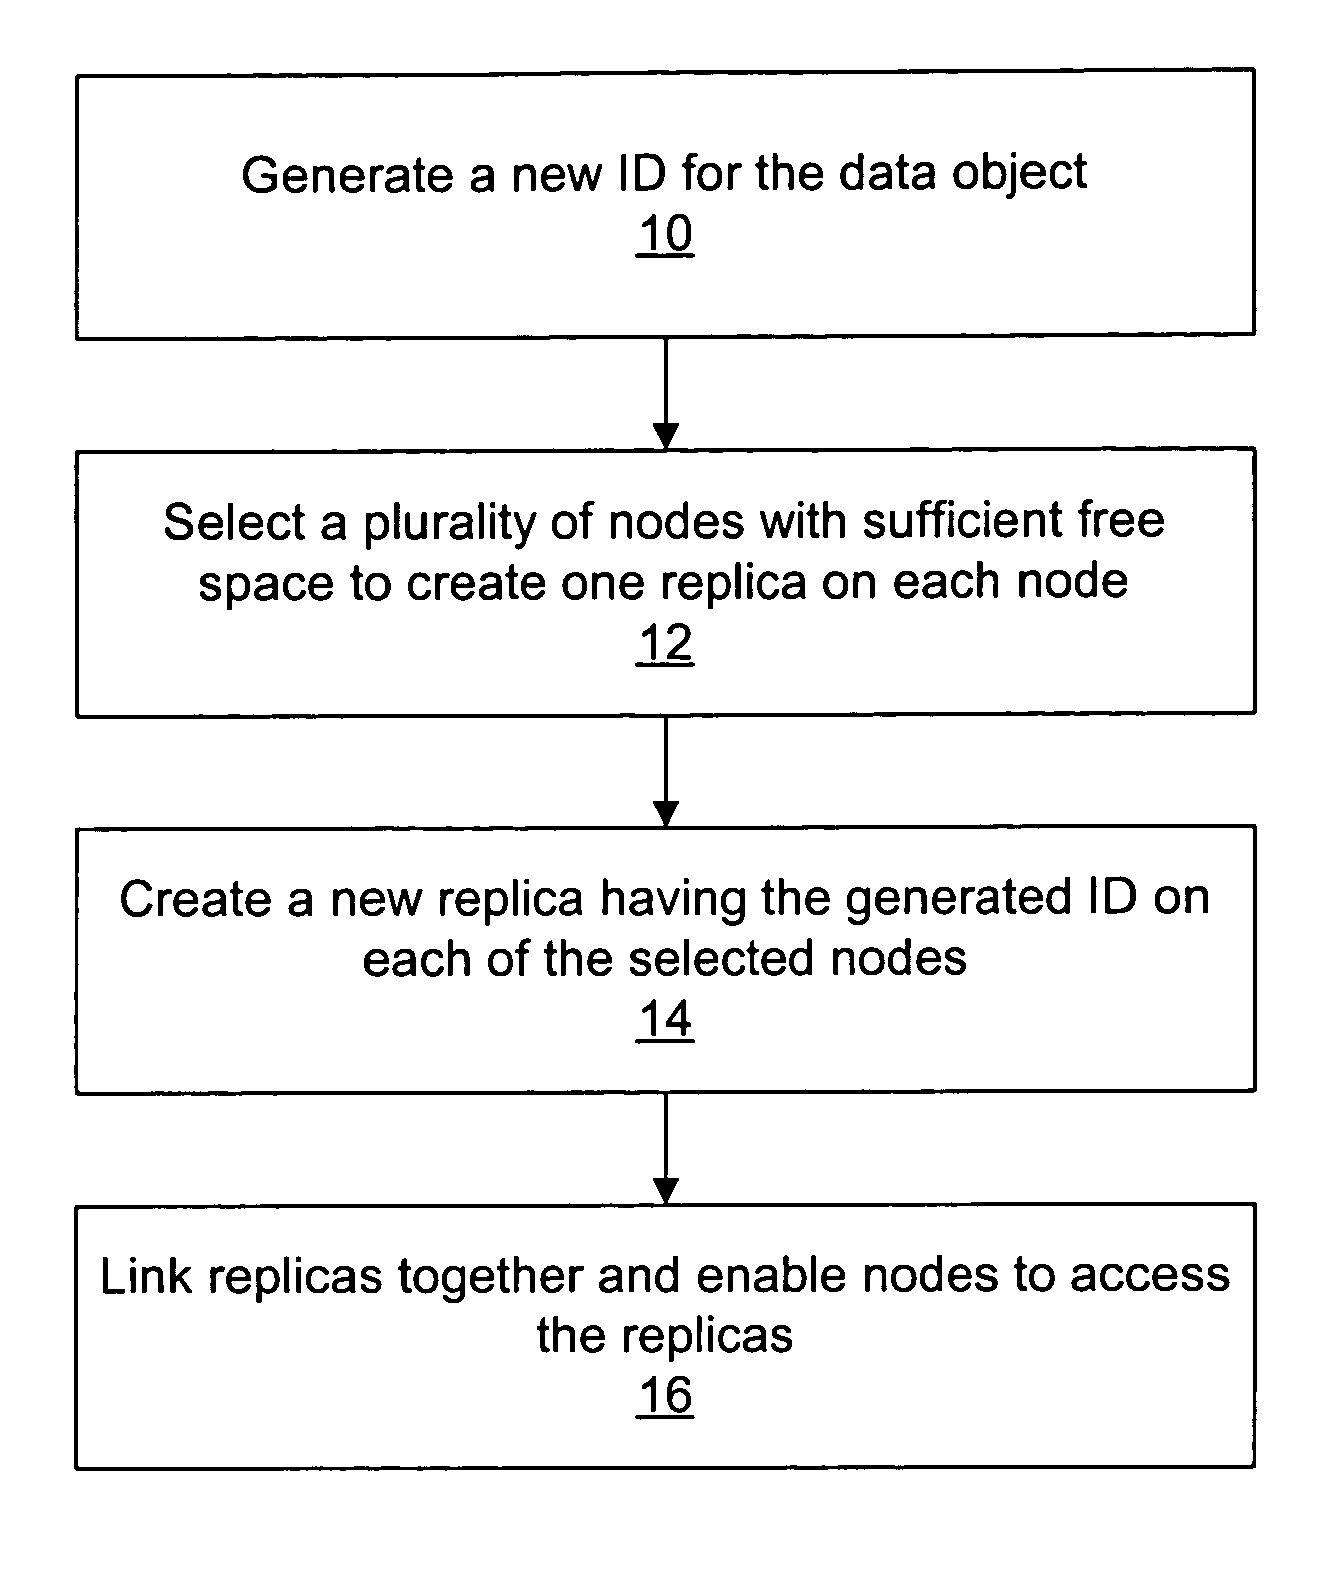 System pre-allocating data object replicas for a distributed file sharing system